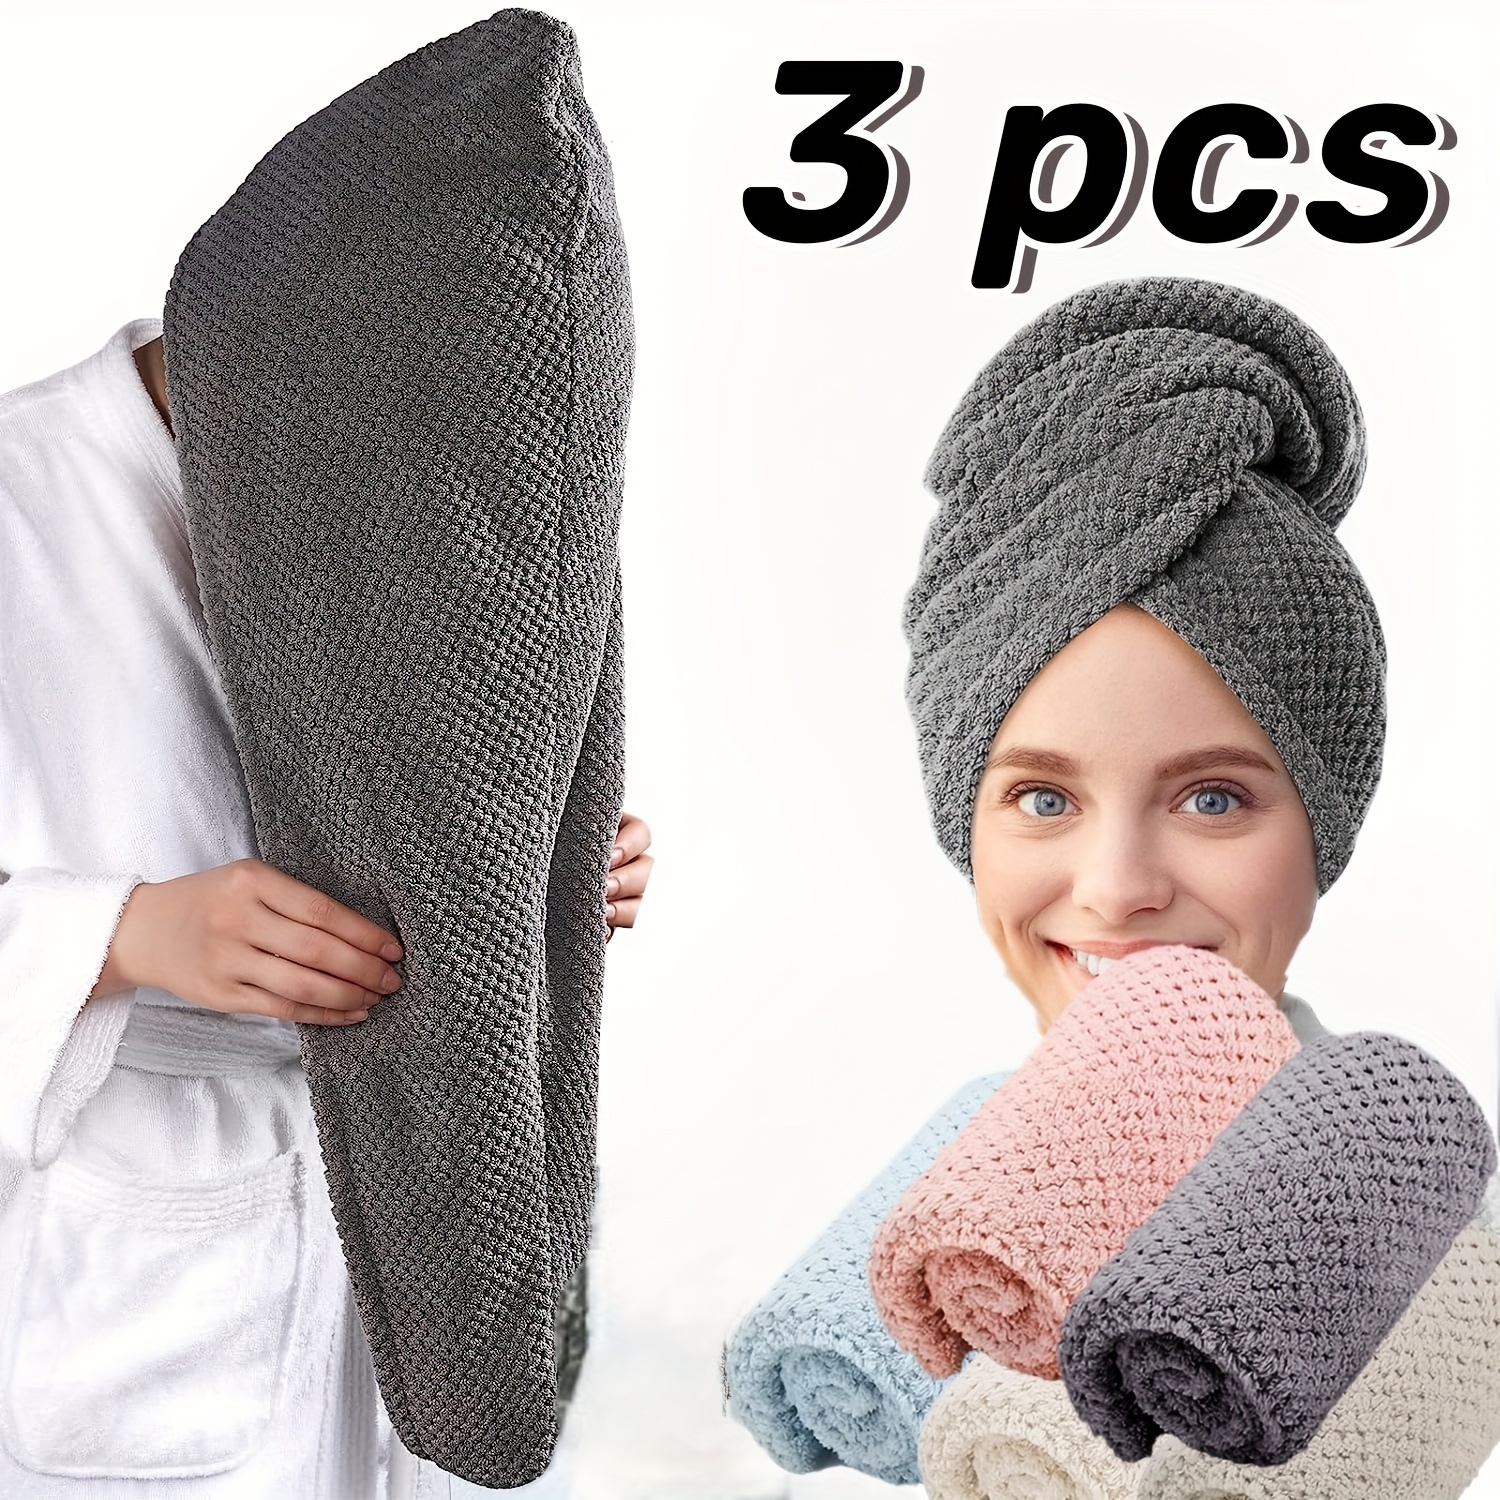 

3pcs Premium Quick-drying Microfiber Head Towel Wrap, Super Absorbent Soft And Comfortable Hair Drying Towel For Frizzy Hair, 9.8 "x 25.5", Must Have Daily Towel Gift, Bathroom Supplies, Home Supplies